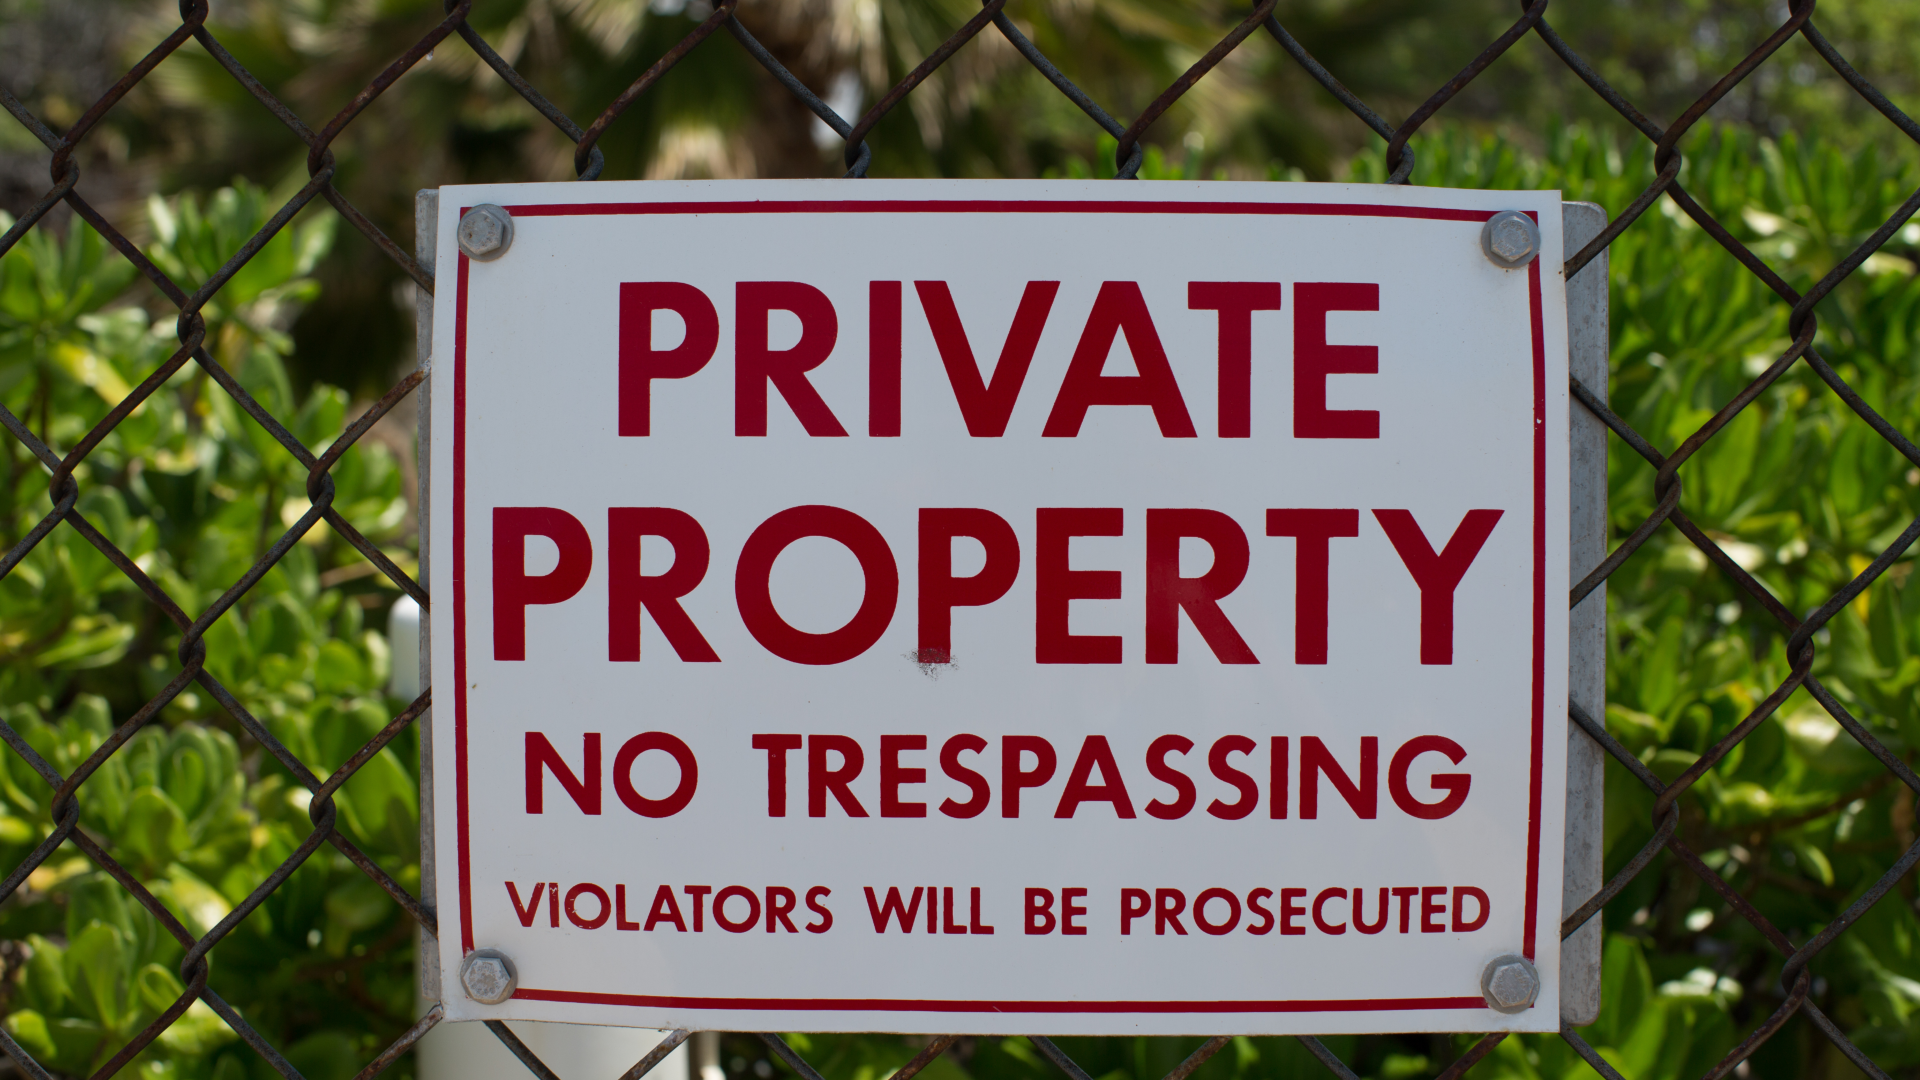 A sign which says private property no trespassing violators will be prosecuted, mounted on a chain-link fence with bush in background